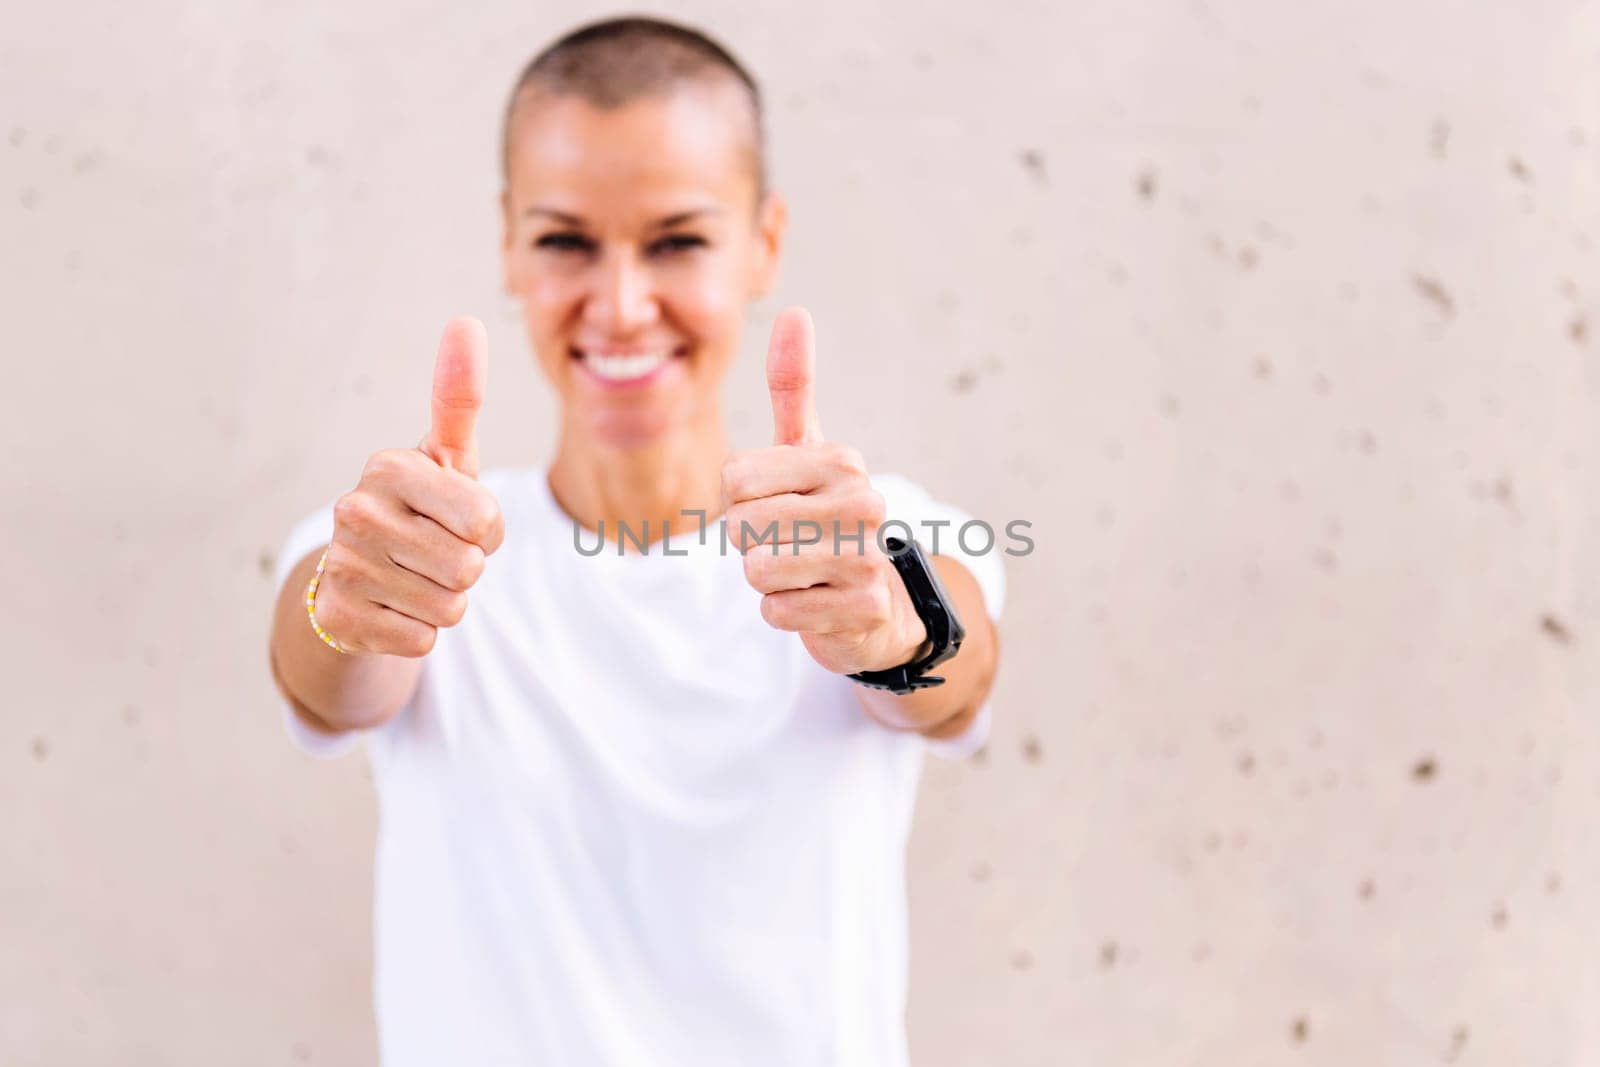 young woman with short hair smiling happy with with thumbs up looking at camera, copy space for text